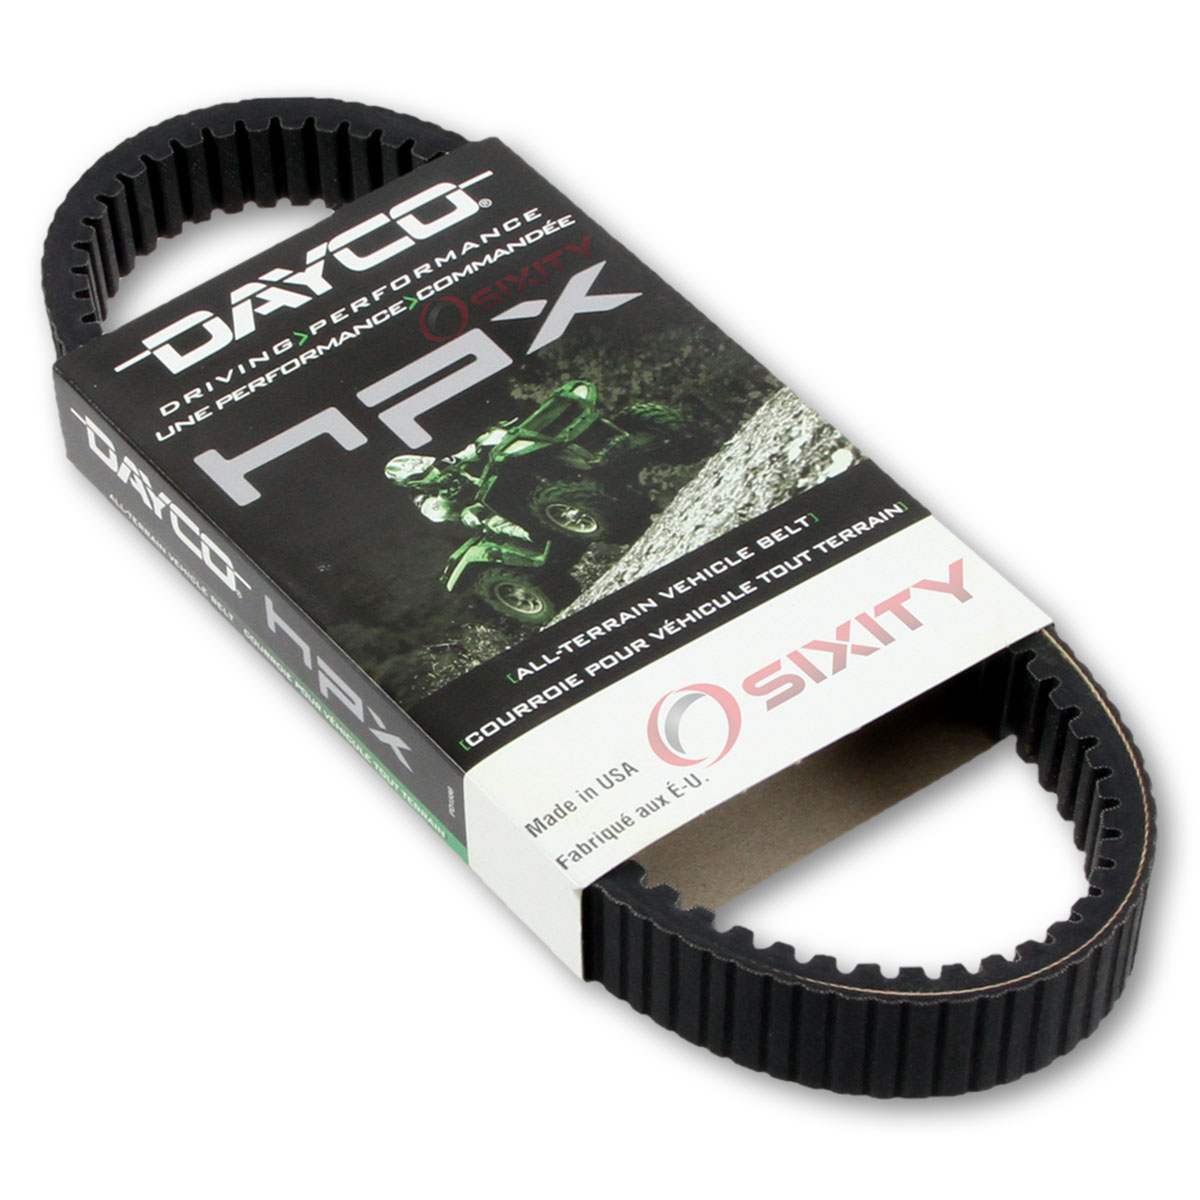 Dayco HPX Drive Belt for 2012 Arctic Cat 550i GT - High Performance Extreme